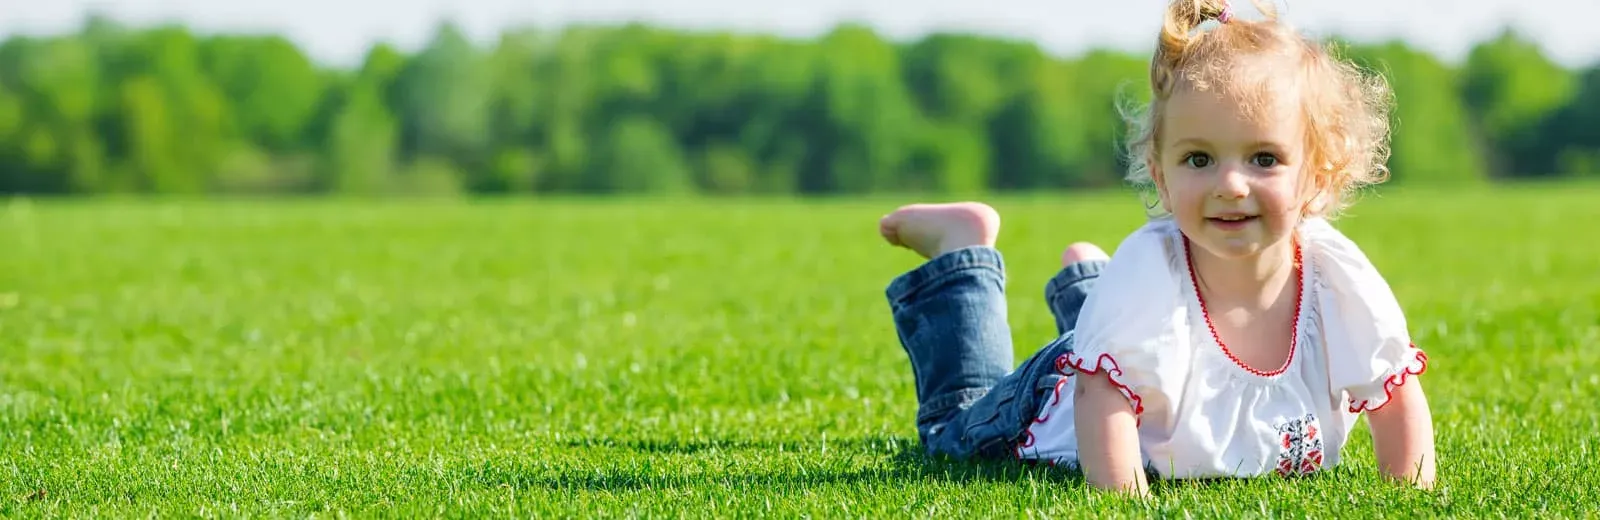 Girl playing in green grass